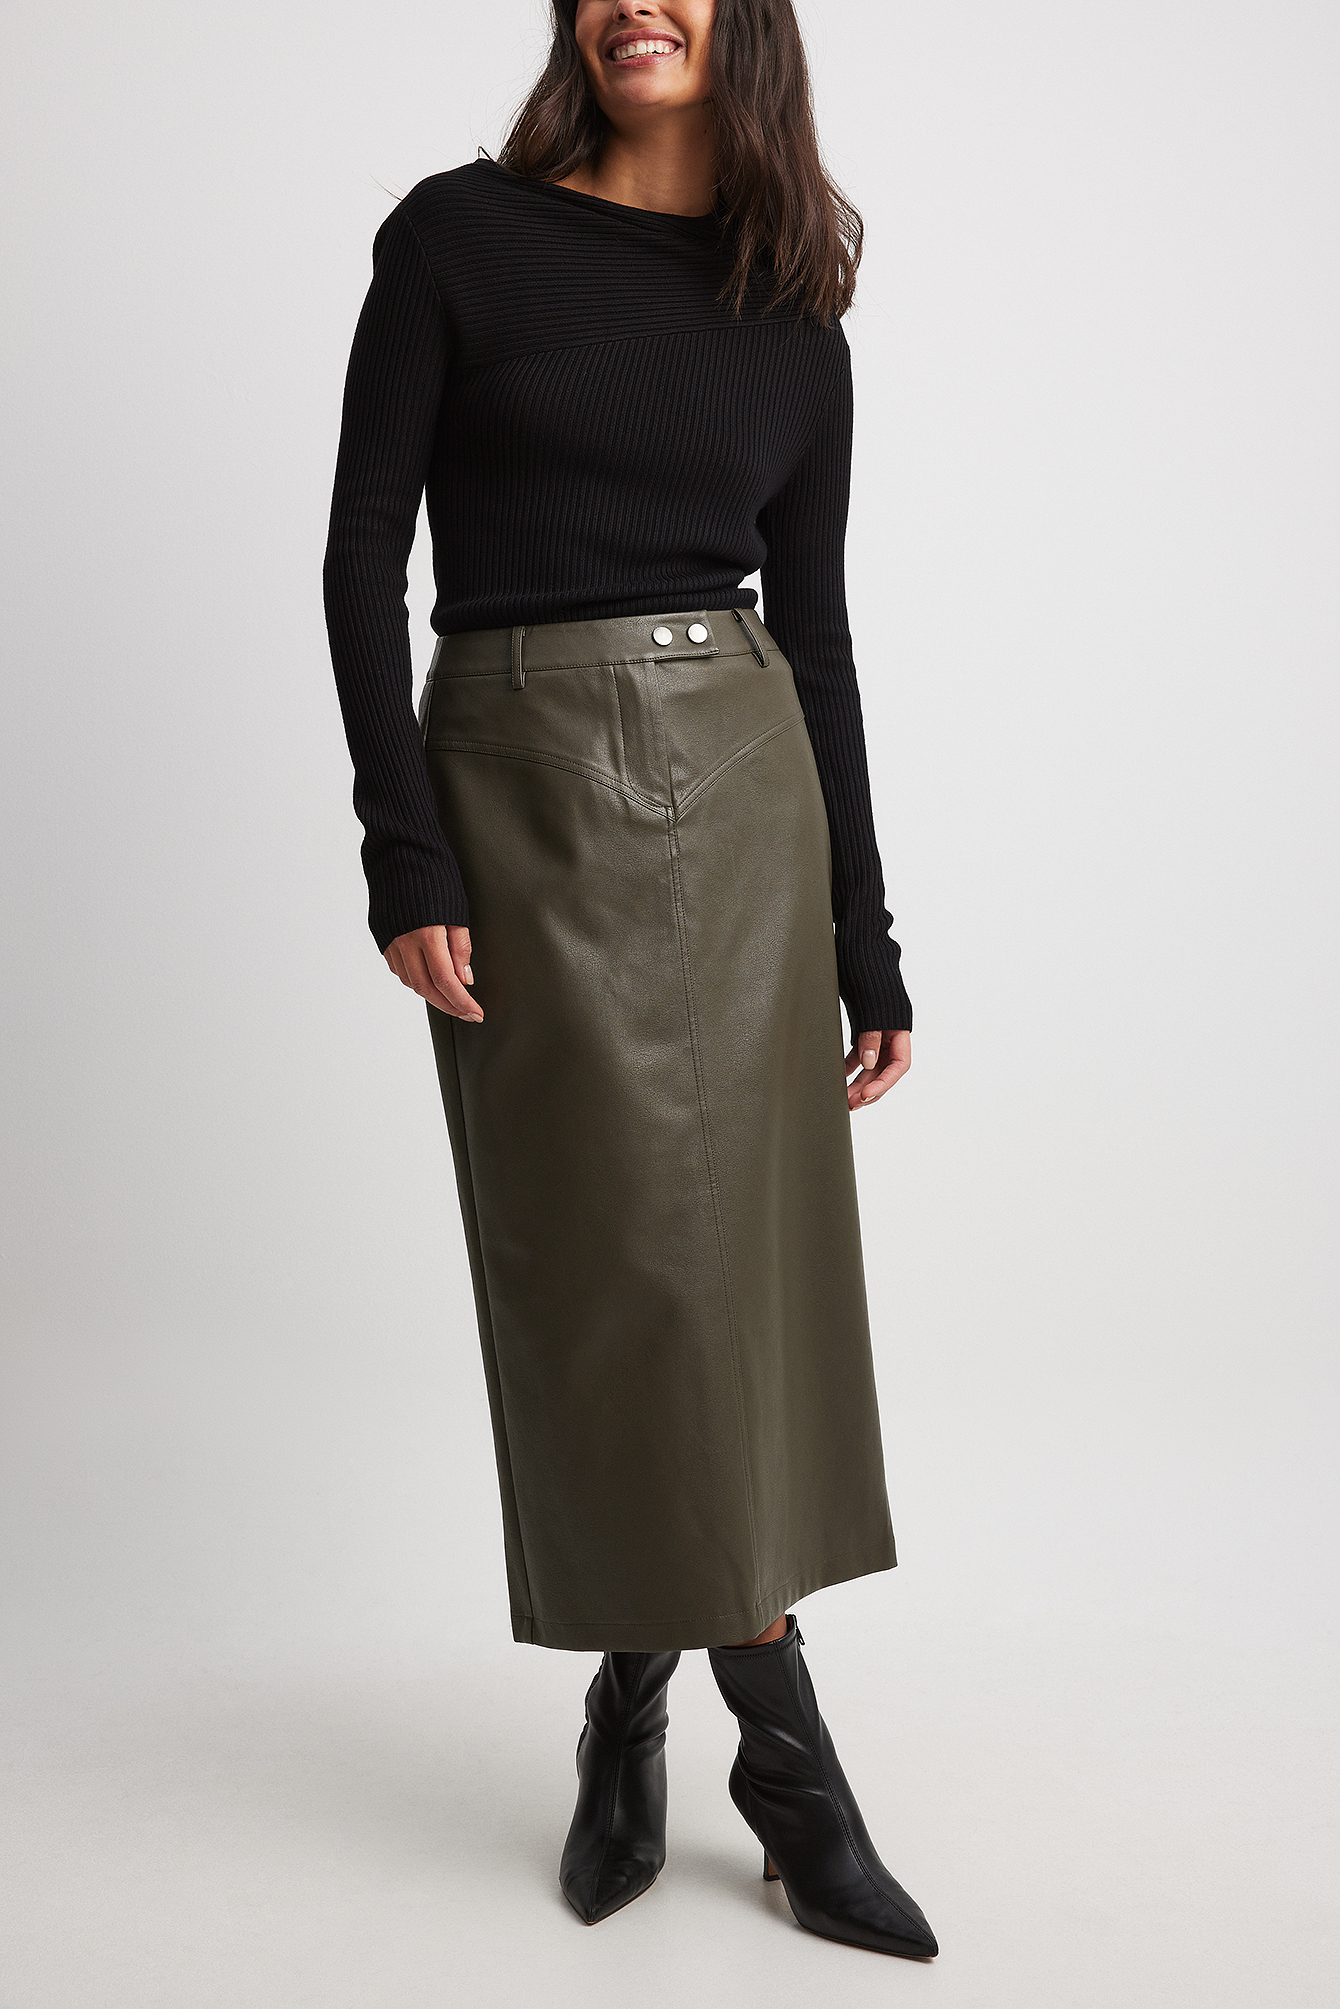 Faux leather skirt, Stunning skirts for women at NA-KD